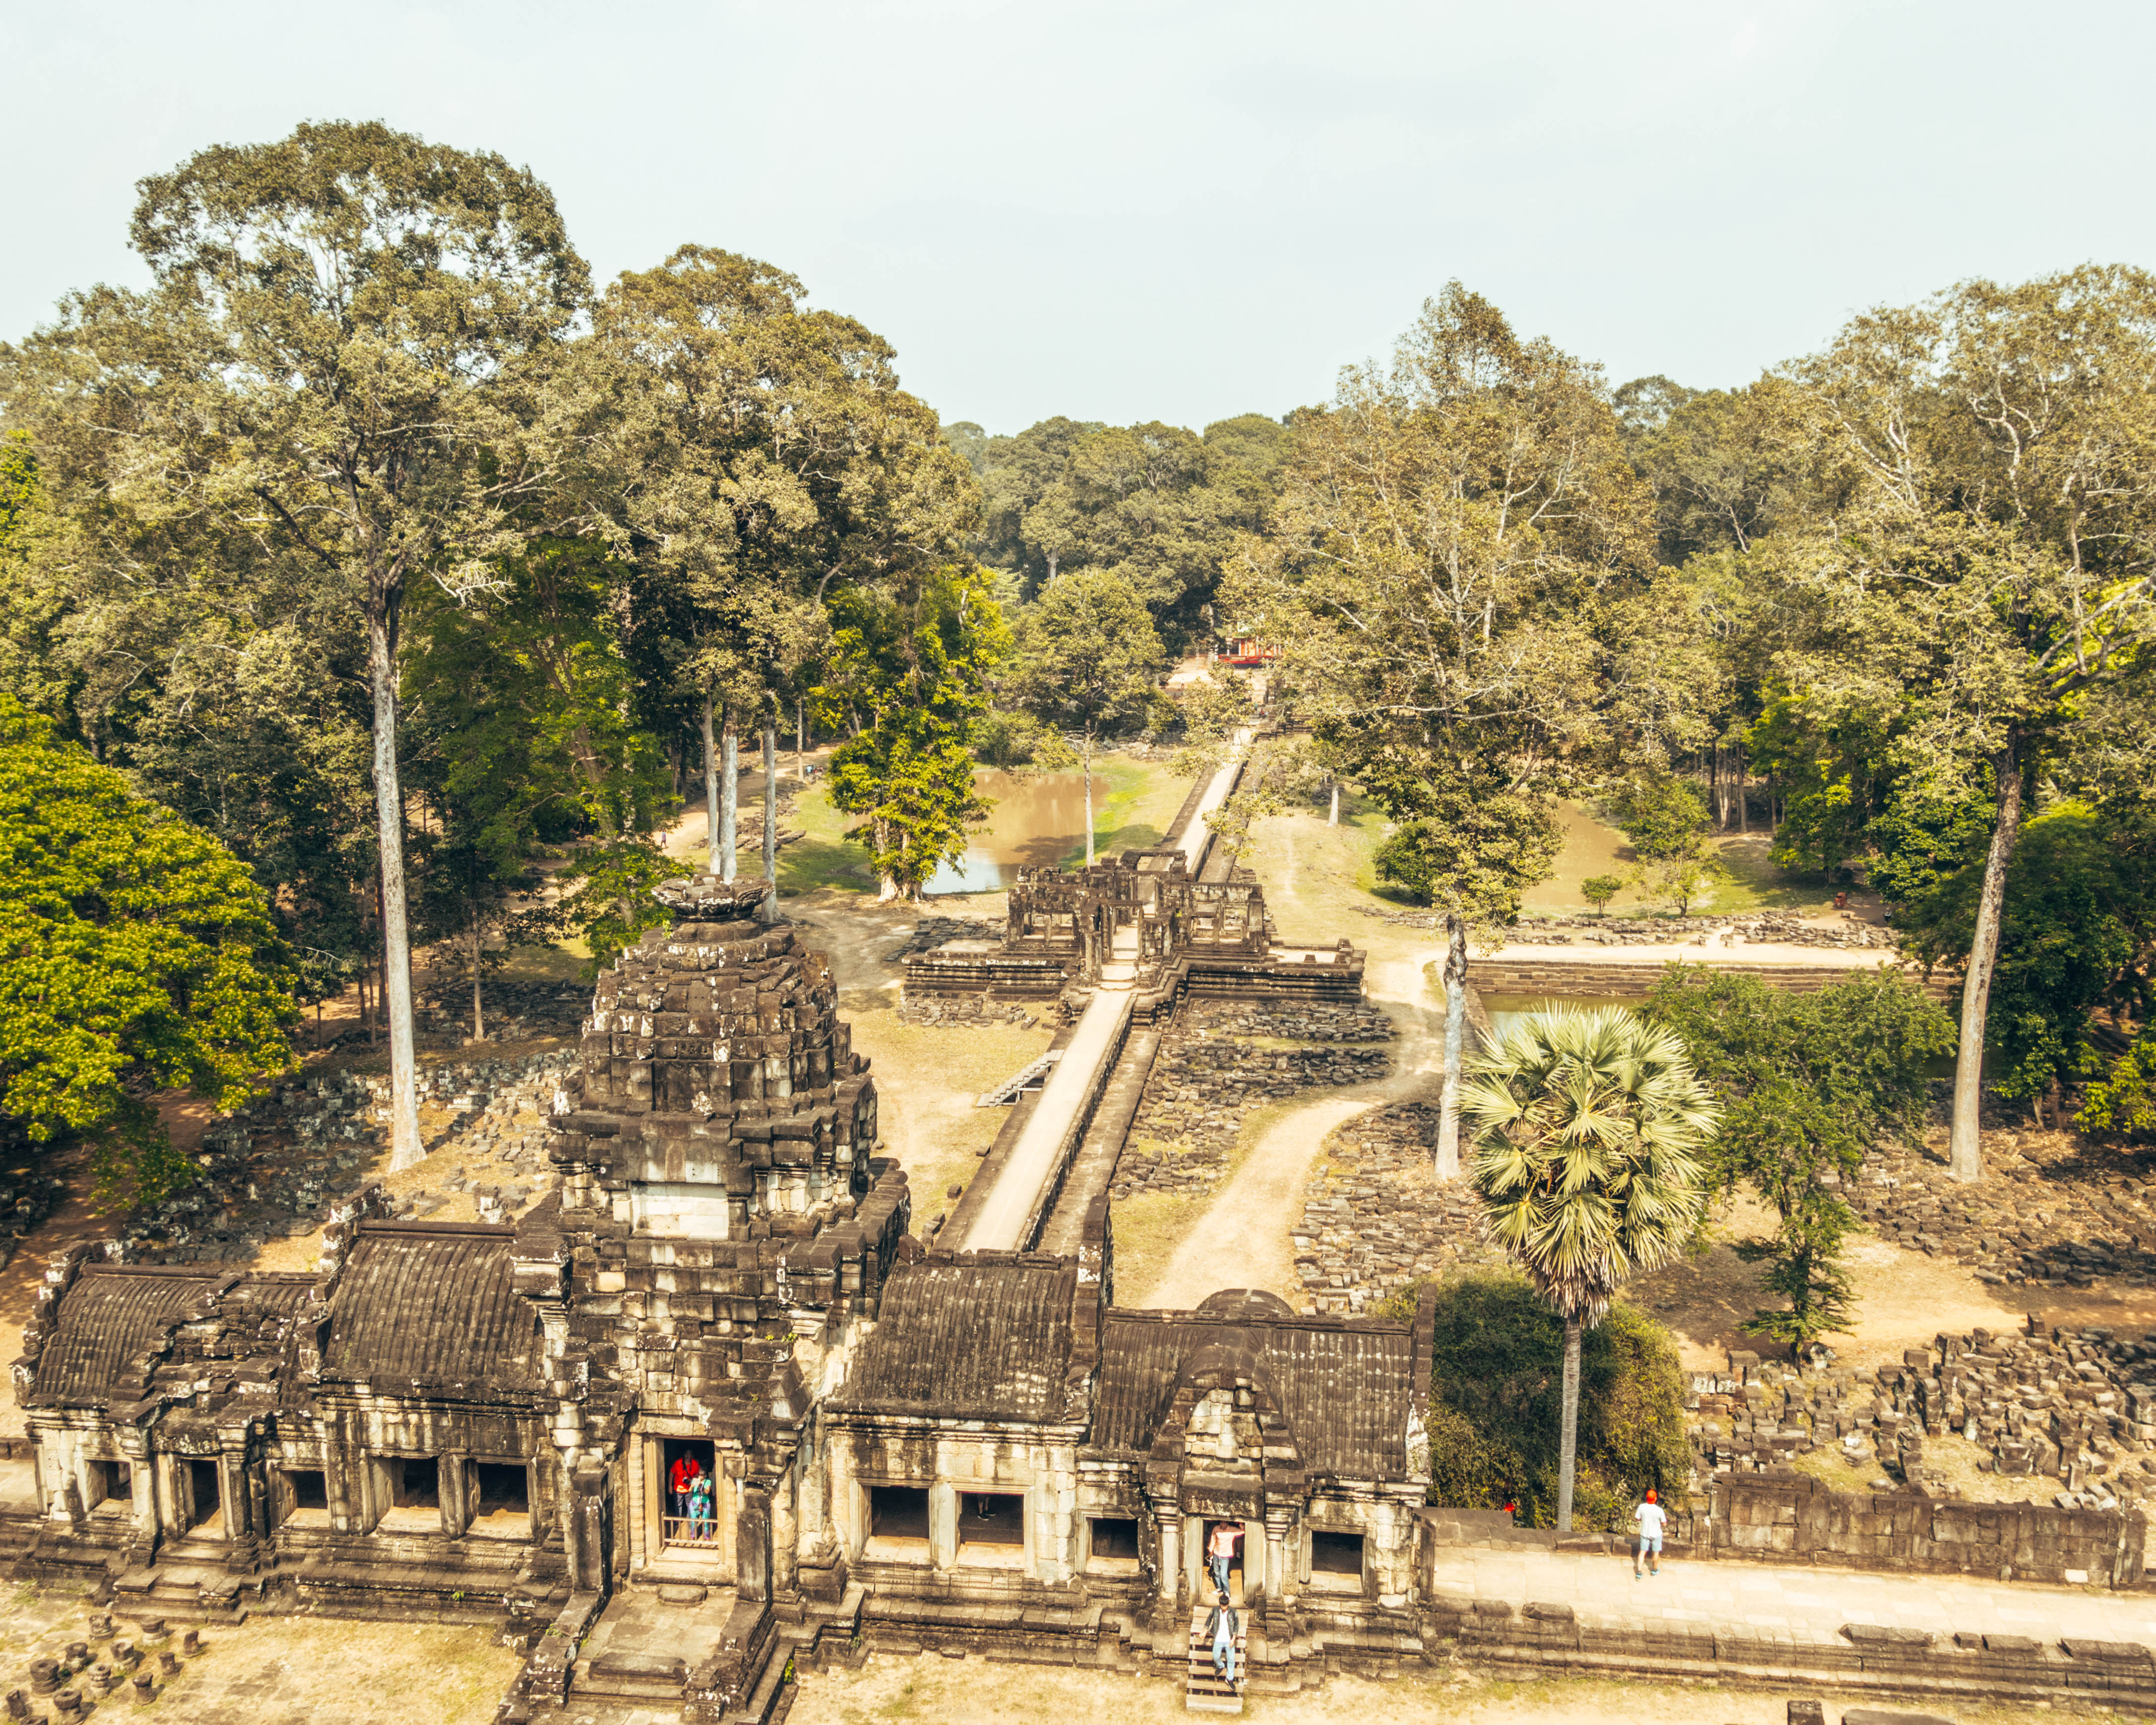 The view from the top of Angkor Wat - Best tips before visiting Angkor Wat Temples - wediditourway.com